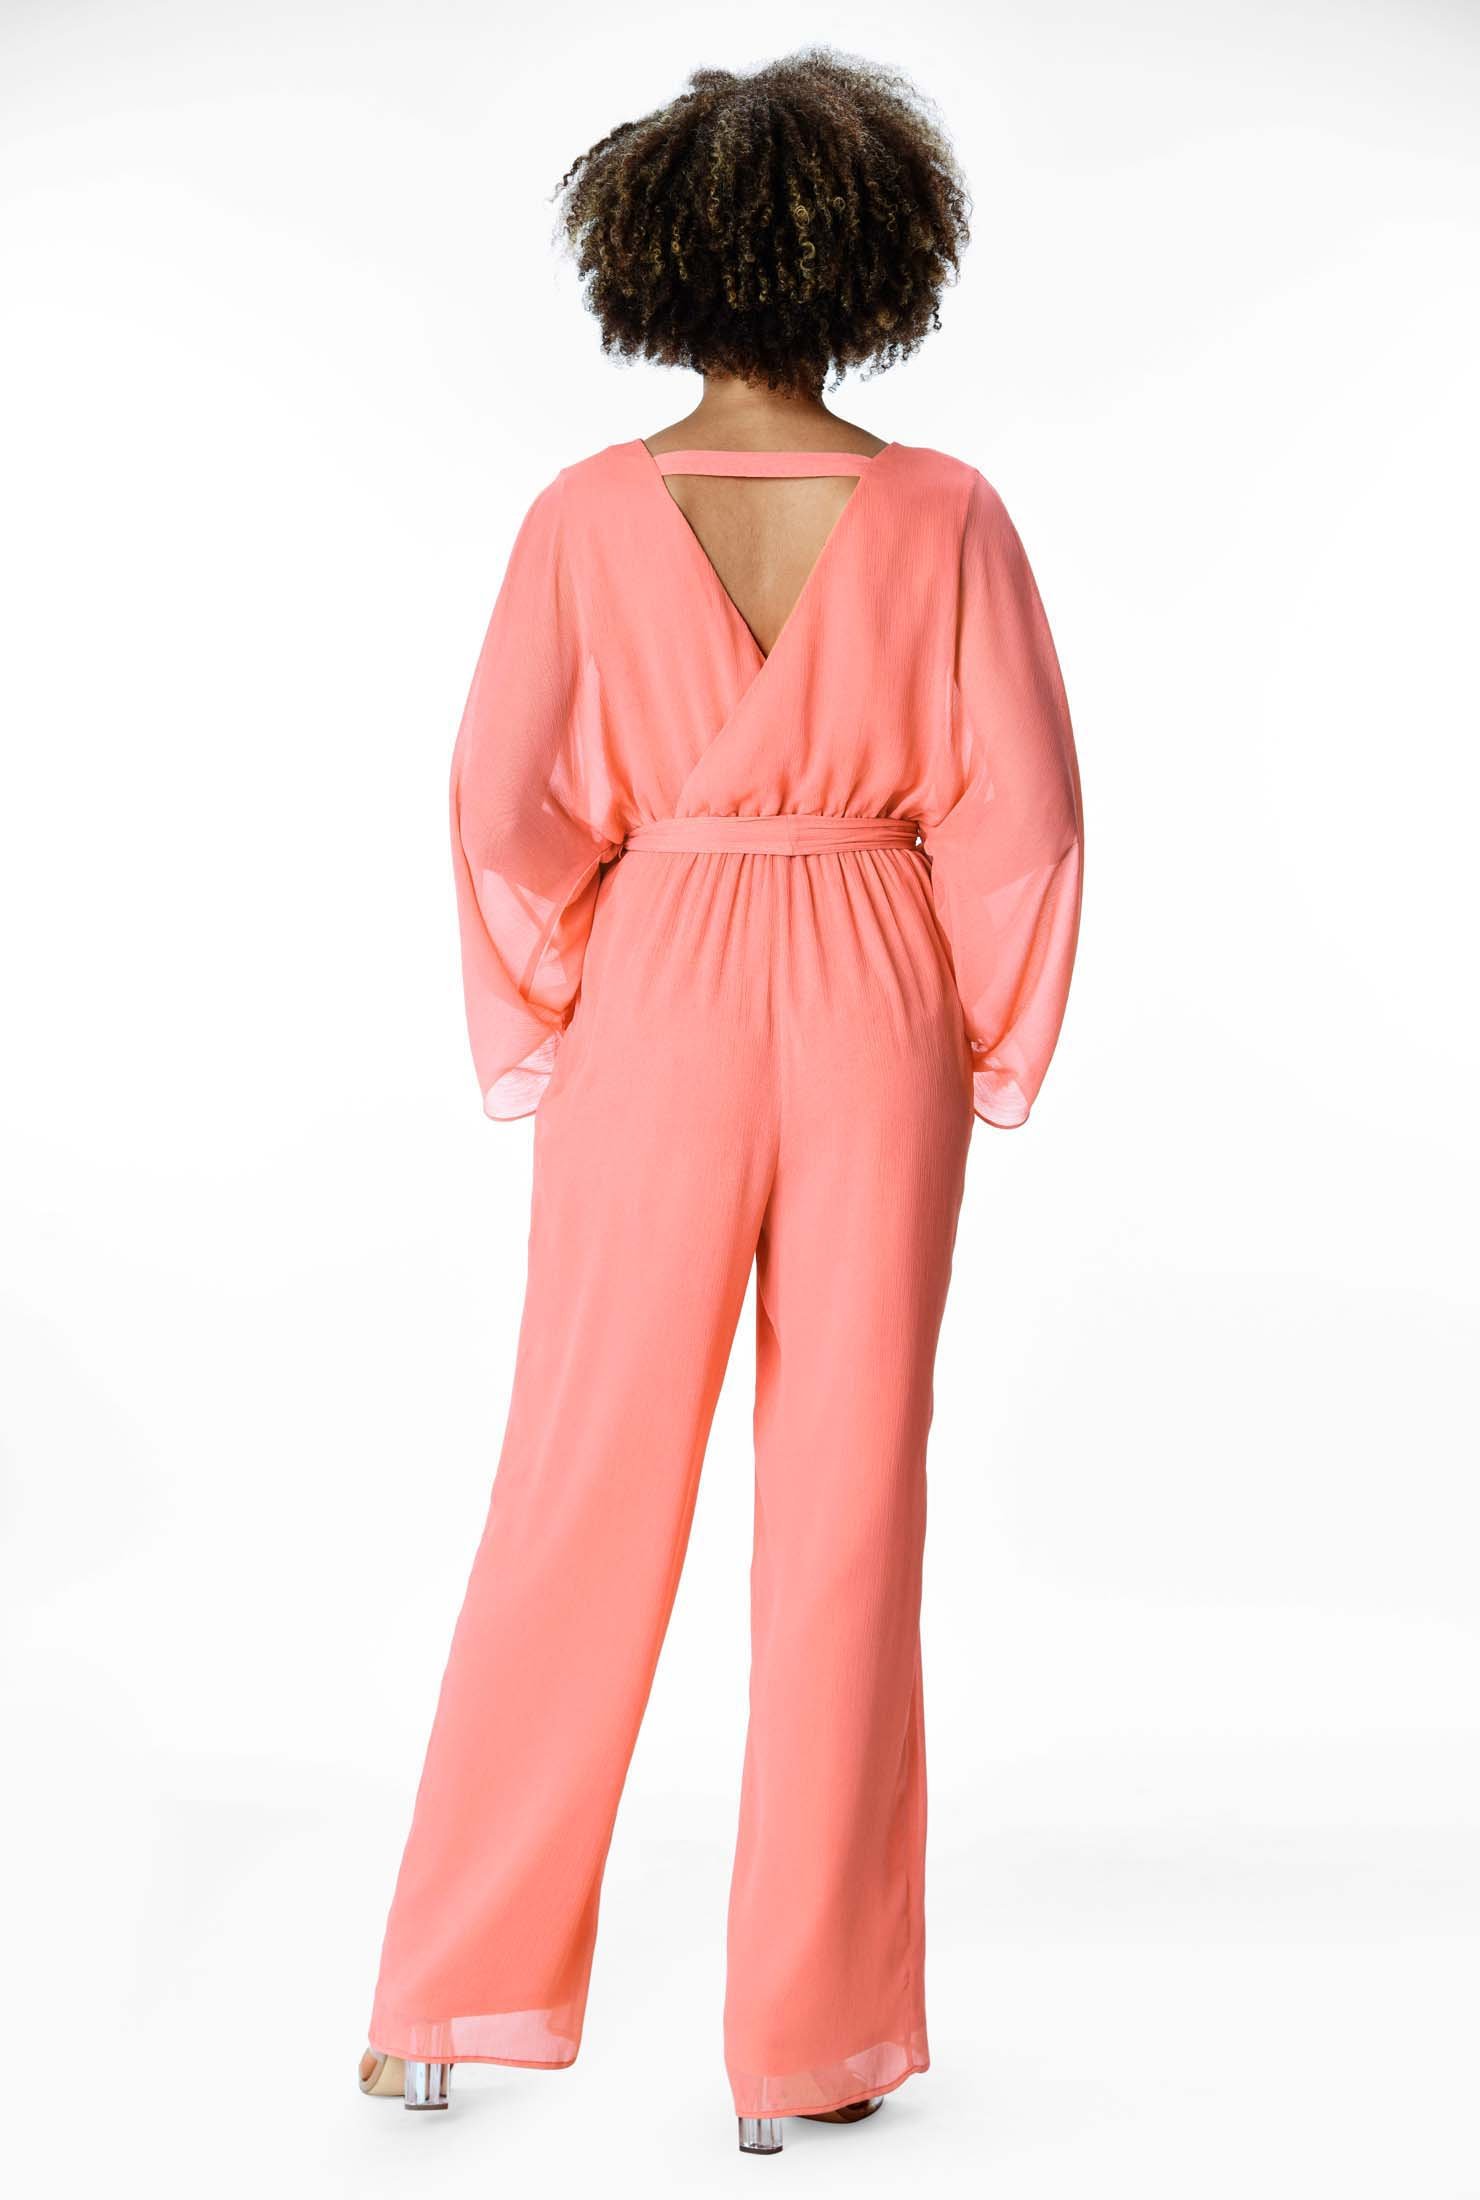 A winning option for formal wear, our chiffon jumpsuit features blousy dolman sleeves and a plunging surplice neckline leading down to a ruched waist and wide legs for a flowing look.